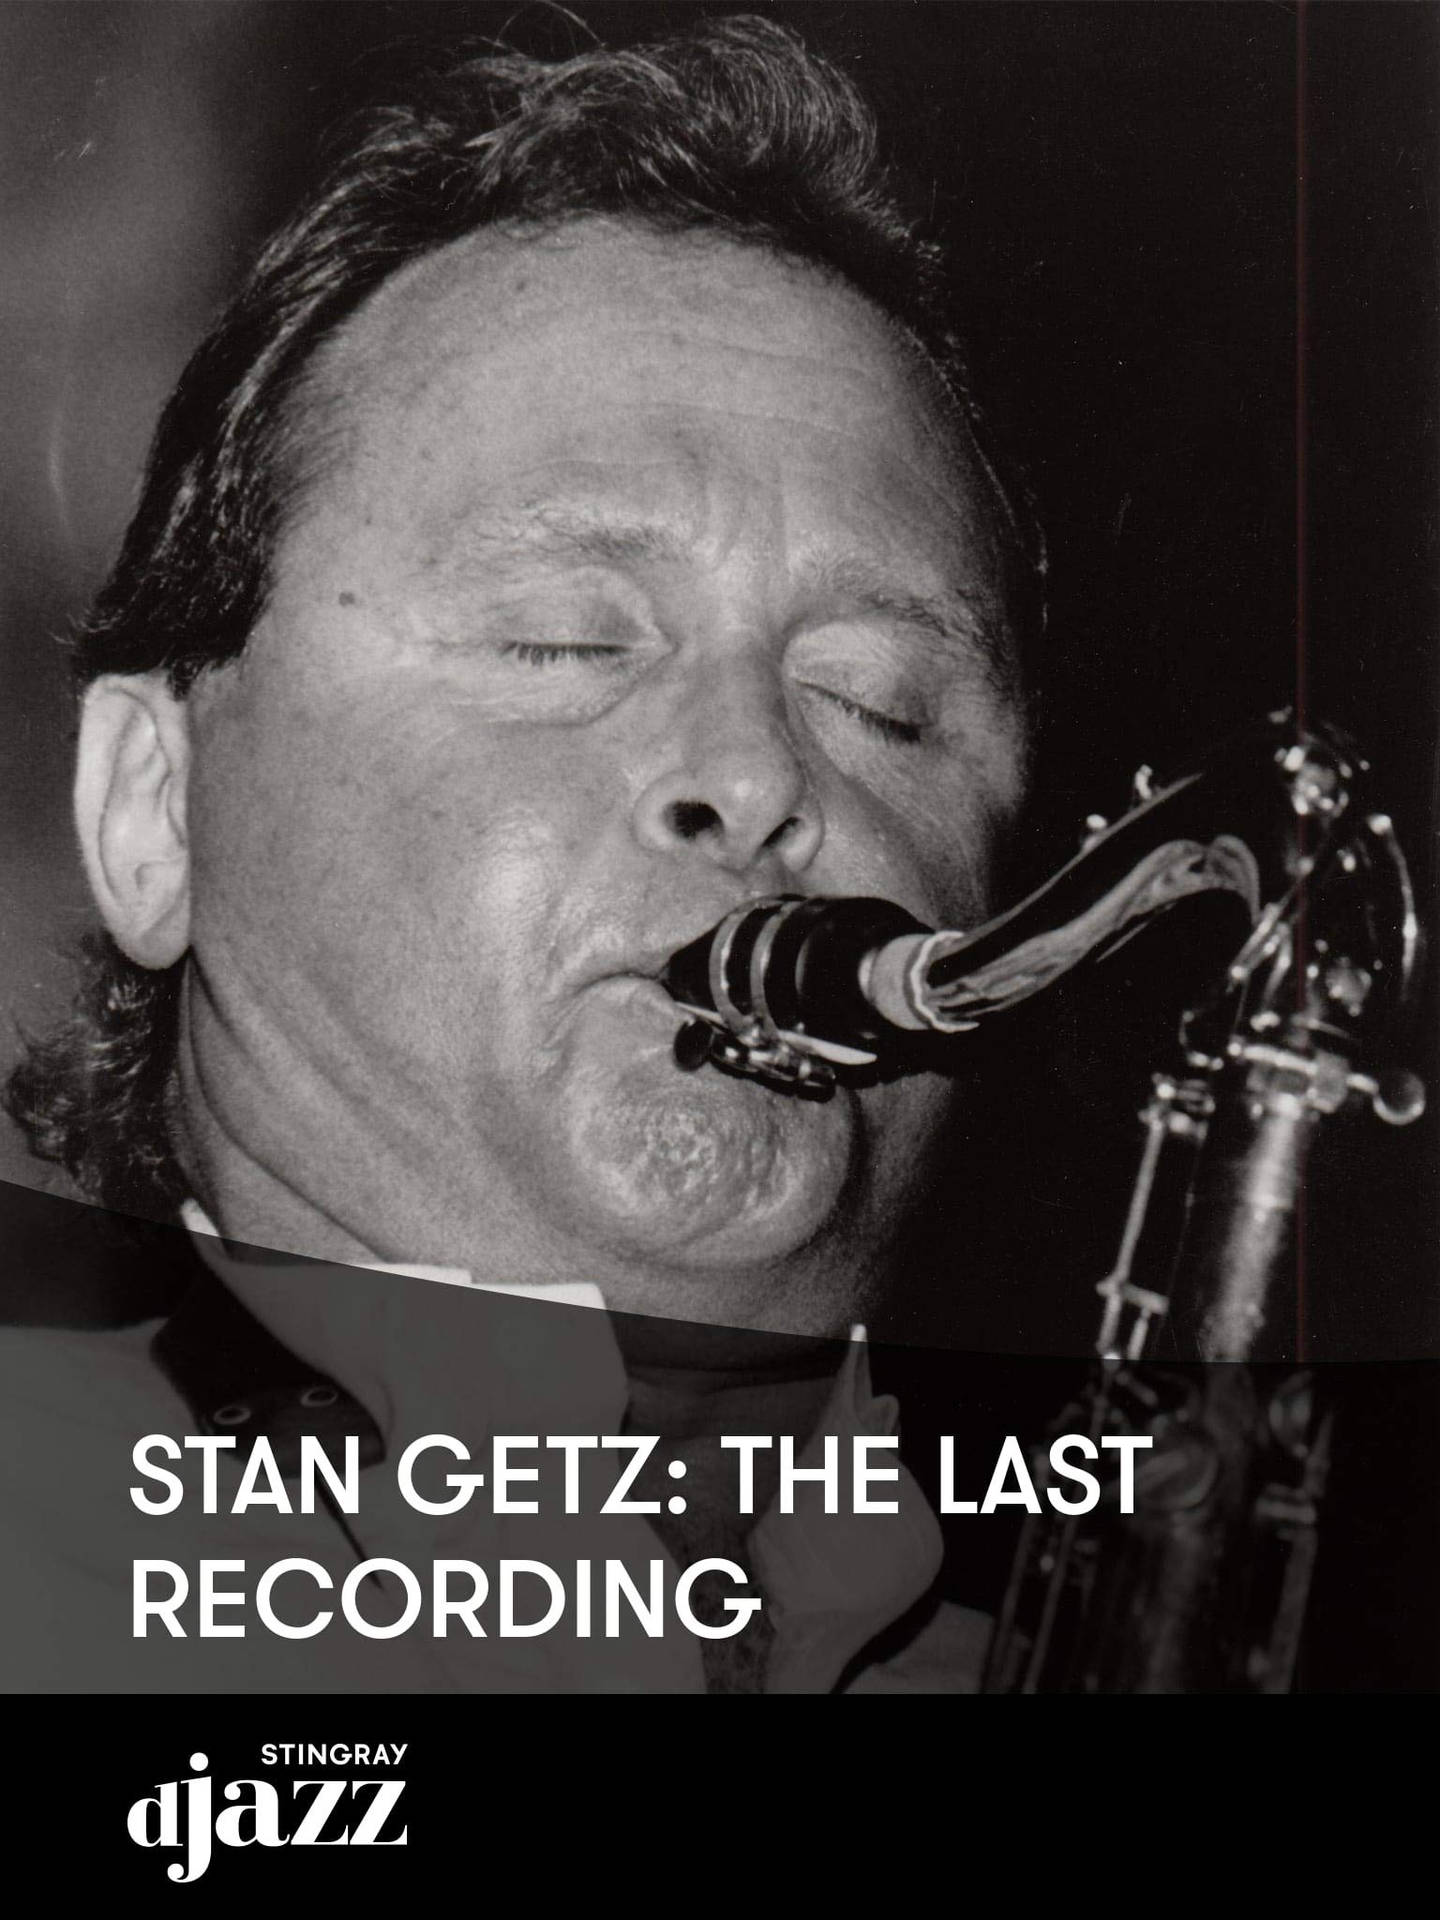 A Riveting Portrait of the Legendary Stan Getz Performing Wallpaper